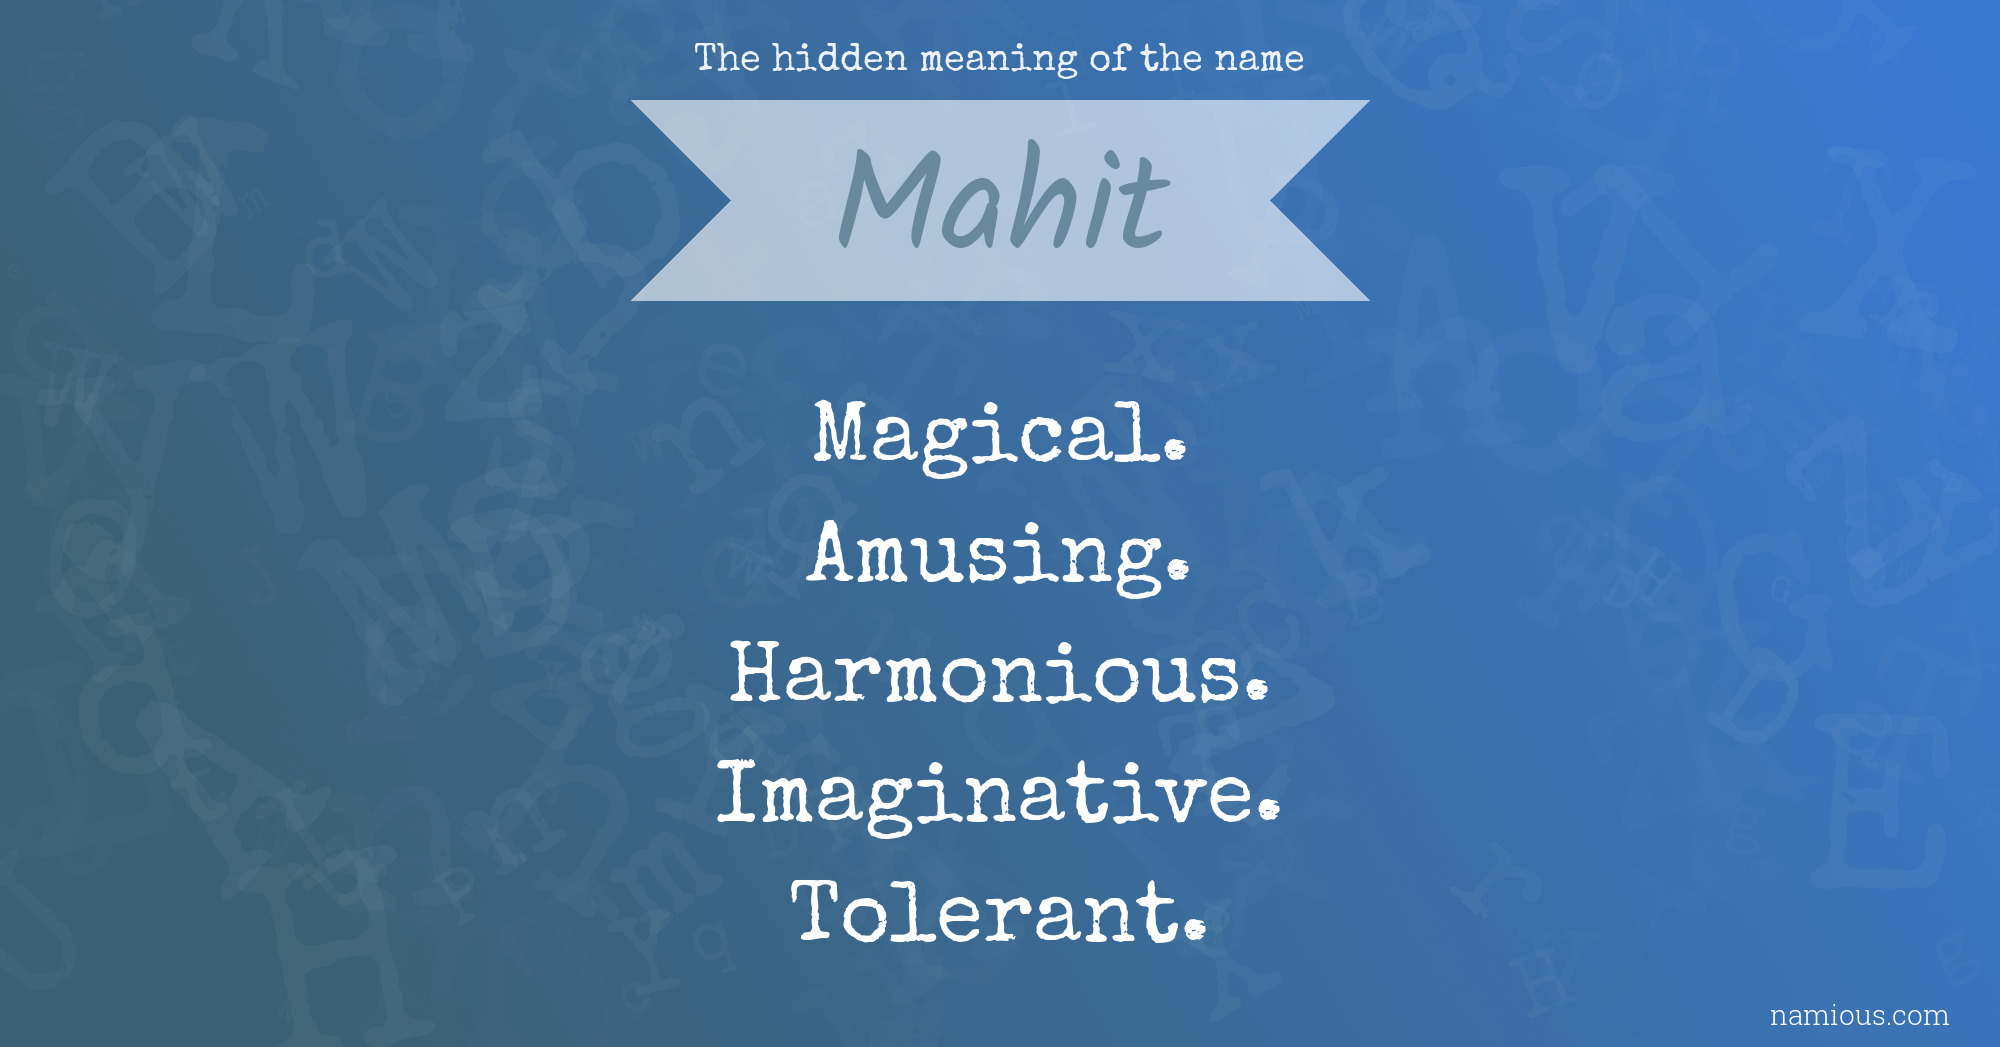 The hidden meaning of the name Mahit